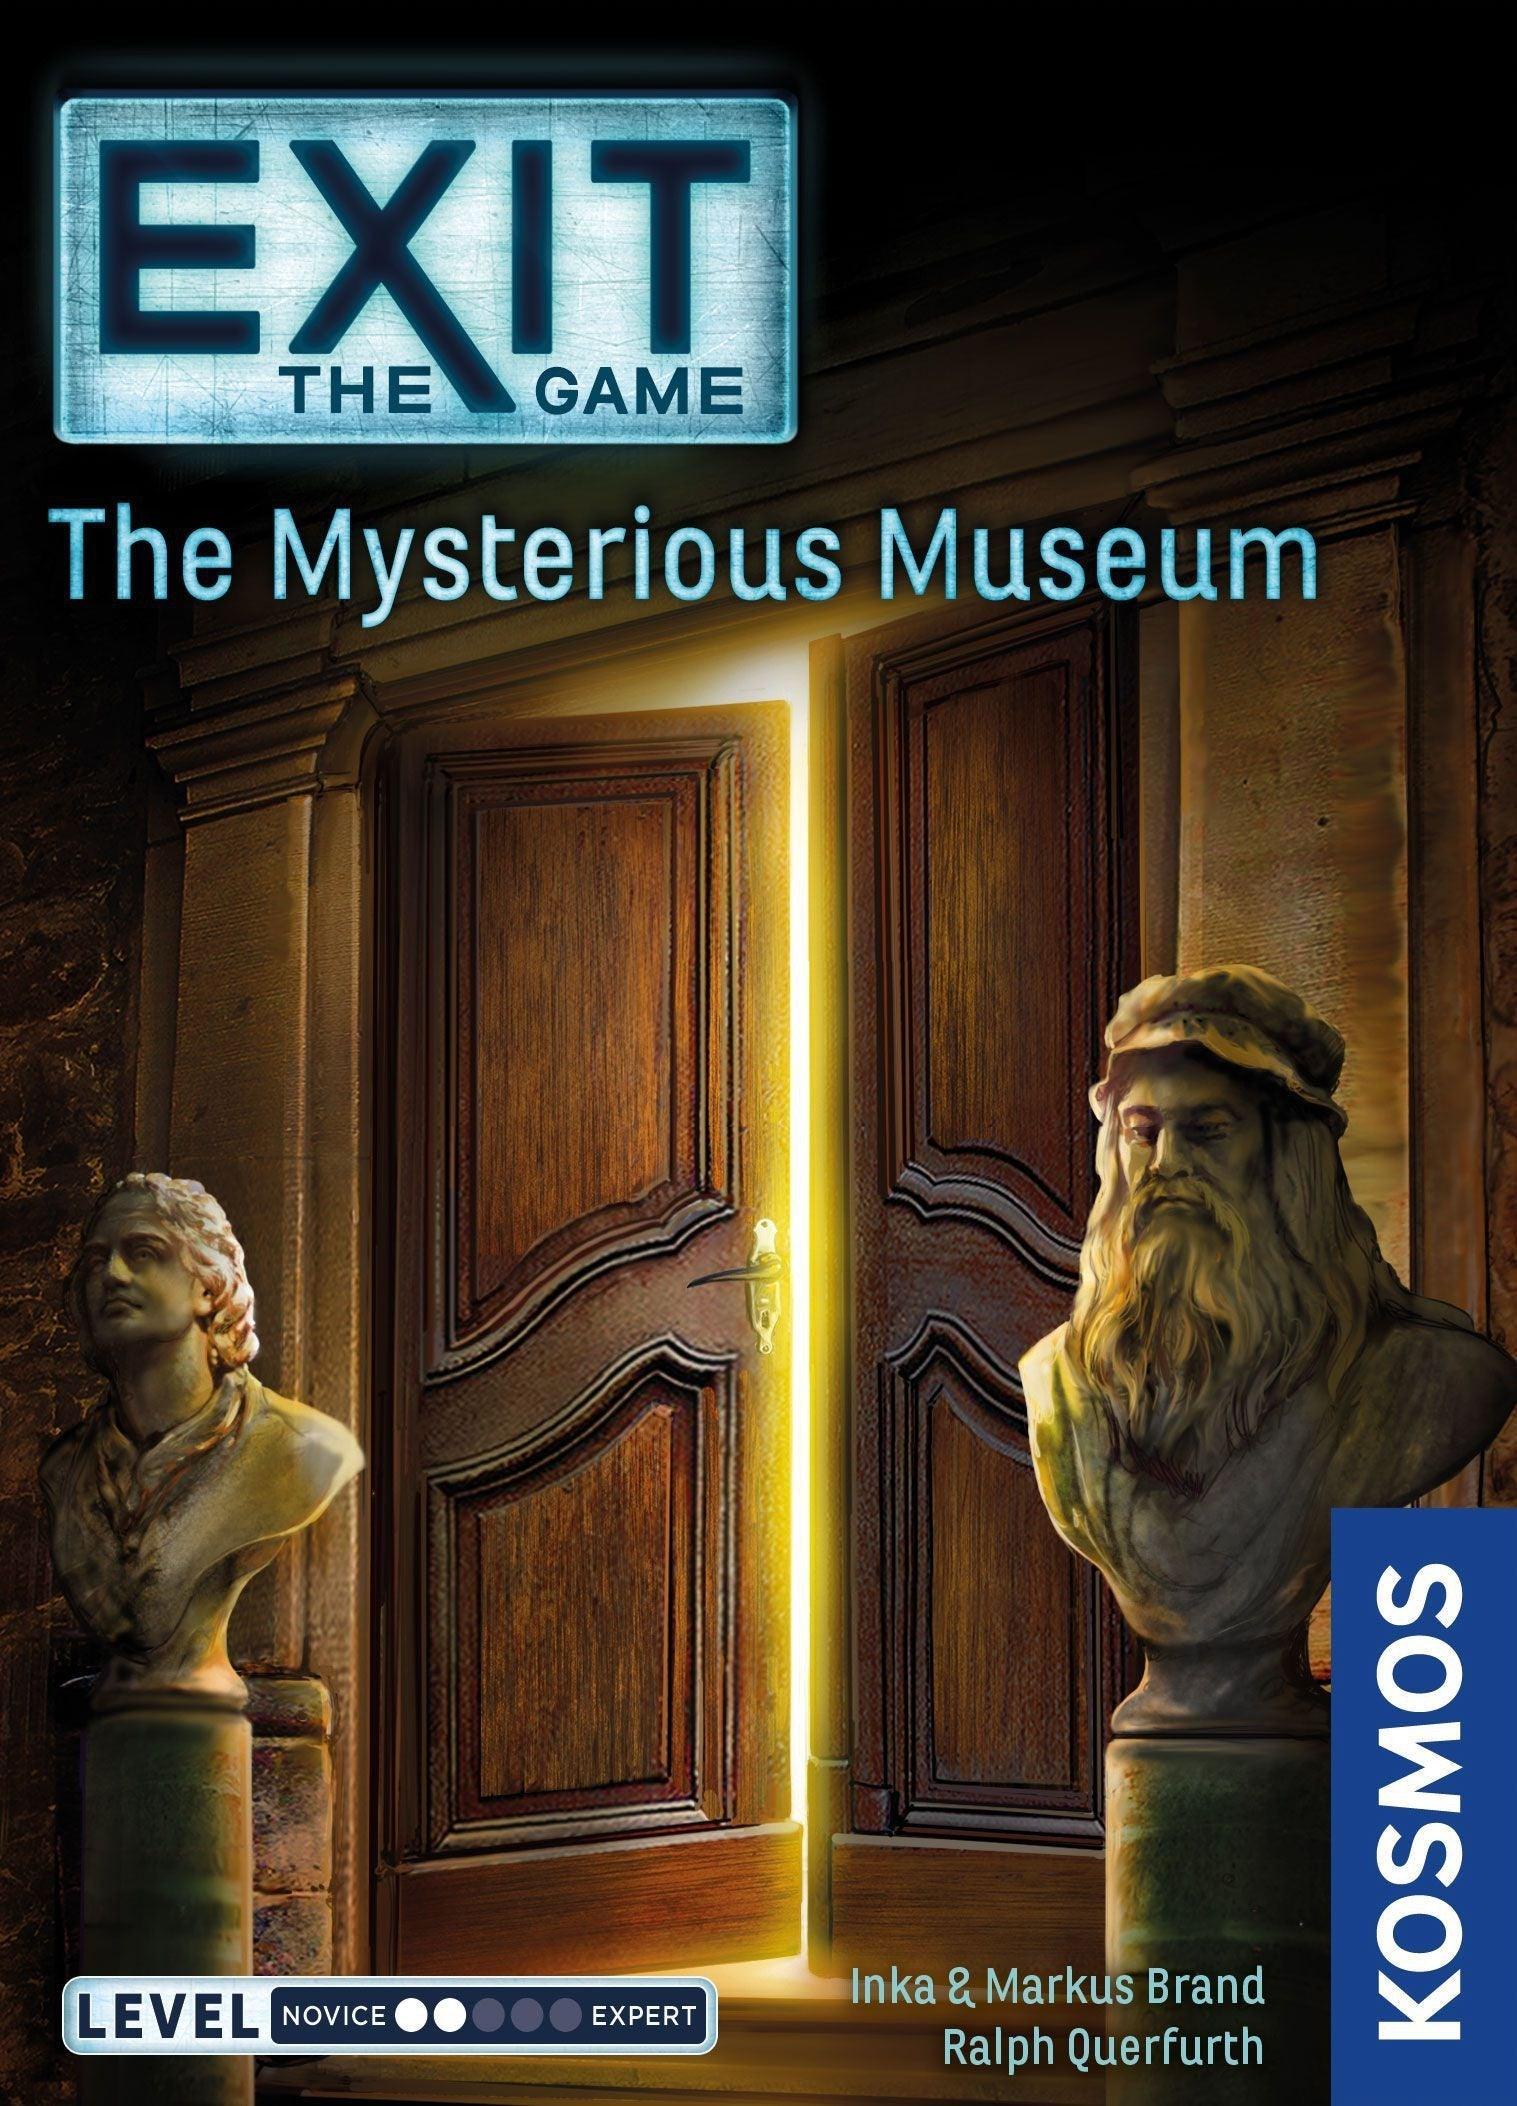 VR-54035 Exit the Game the Mysterious Museum - Kosmos - Titan Pop Culture